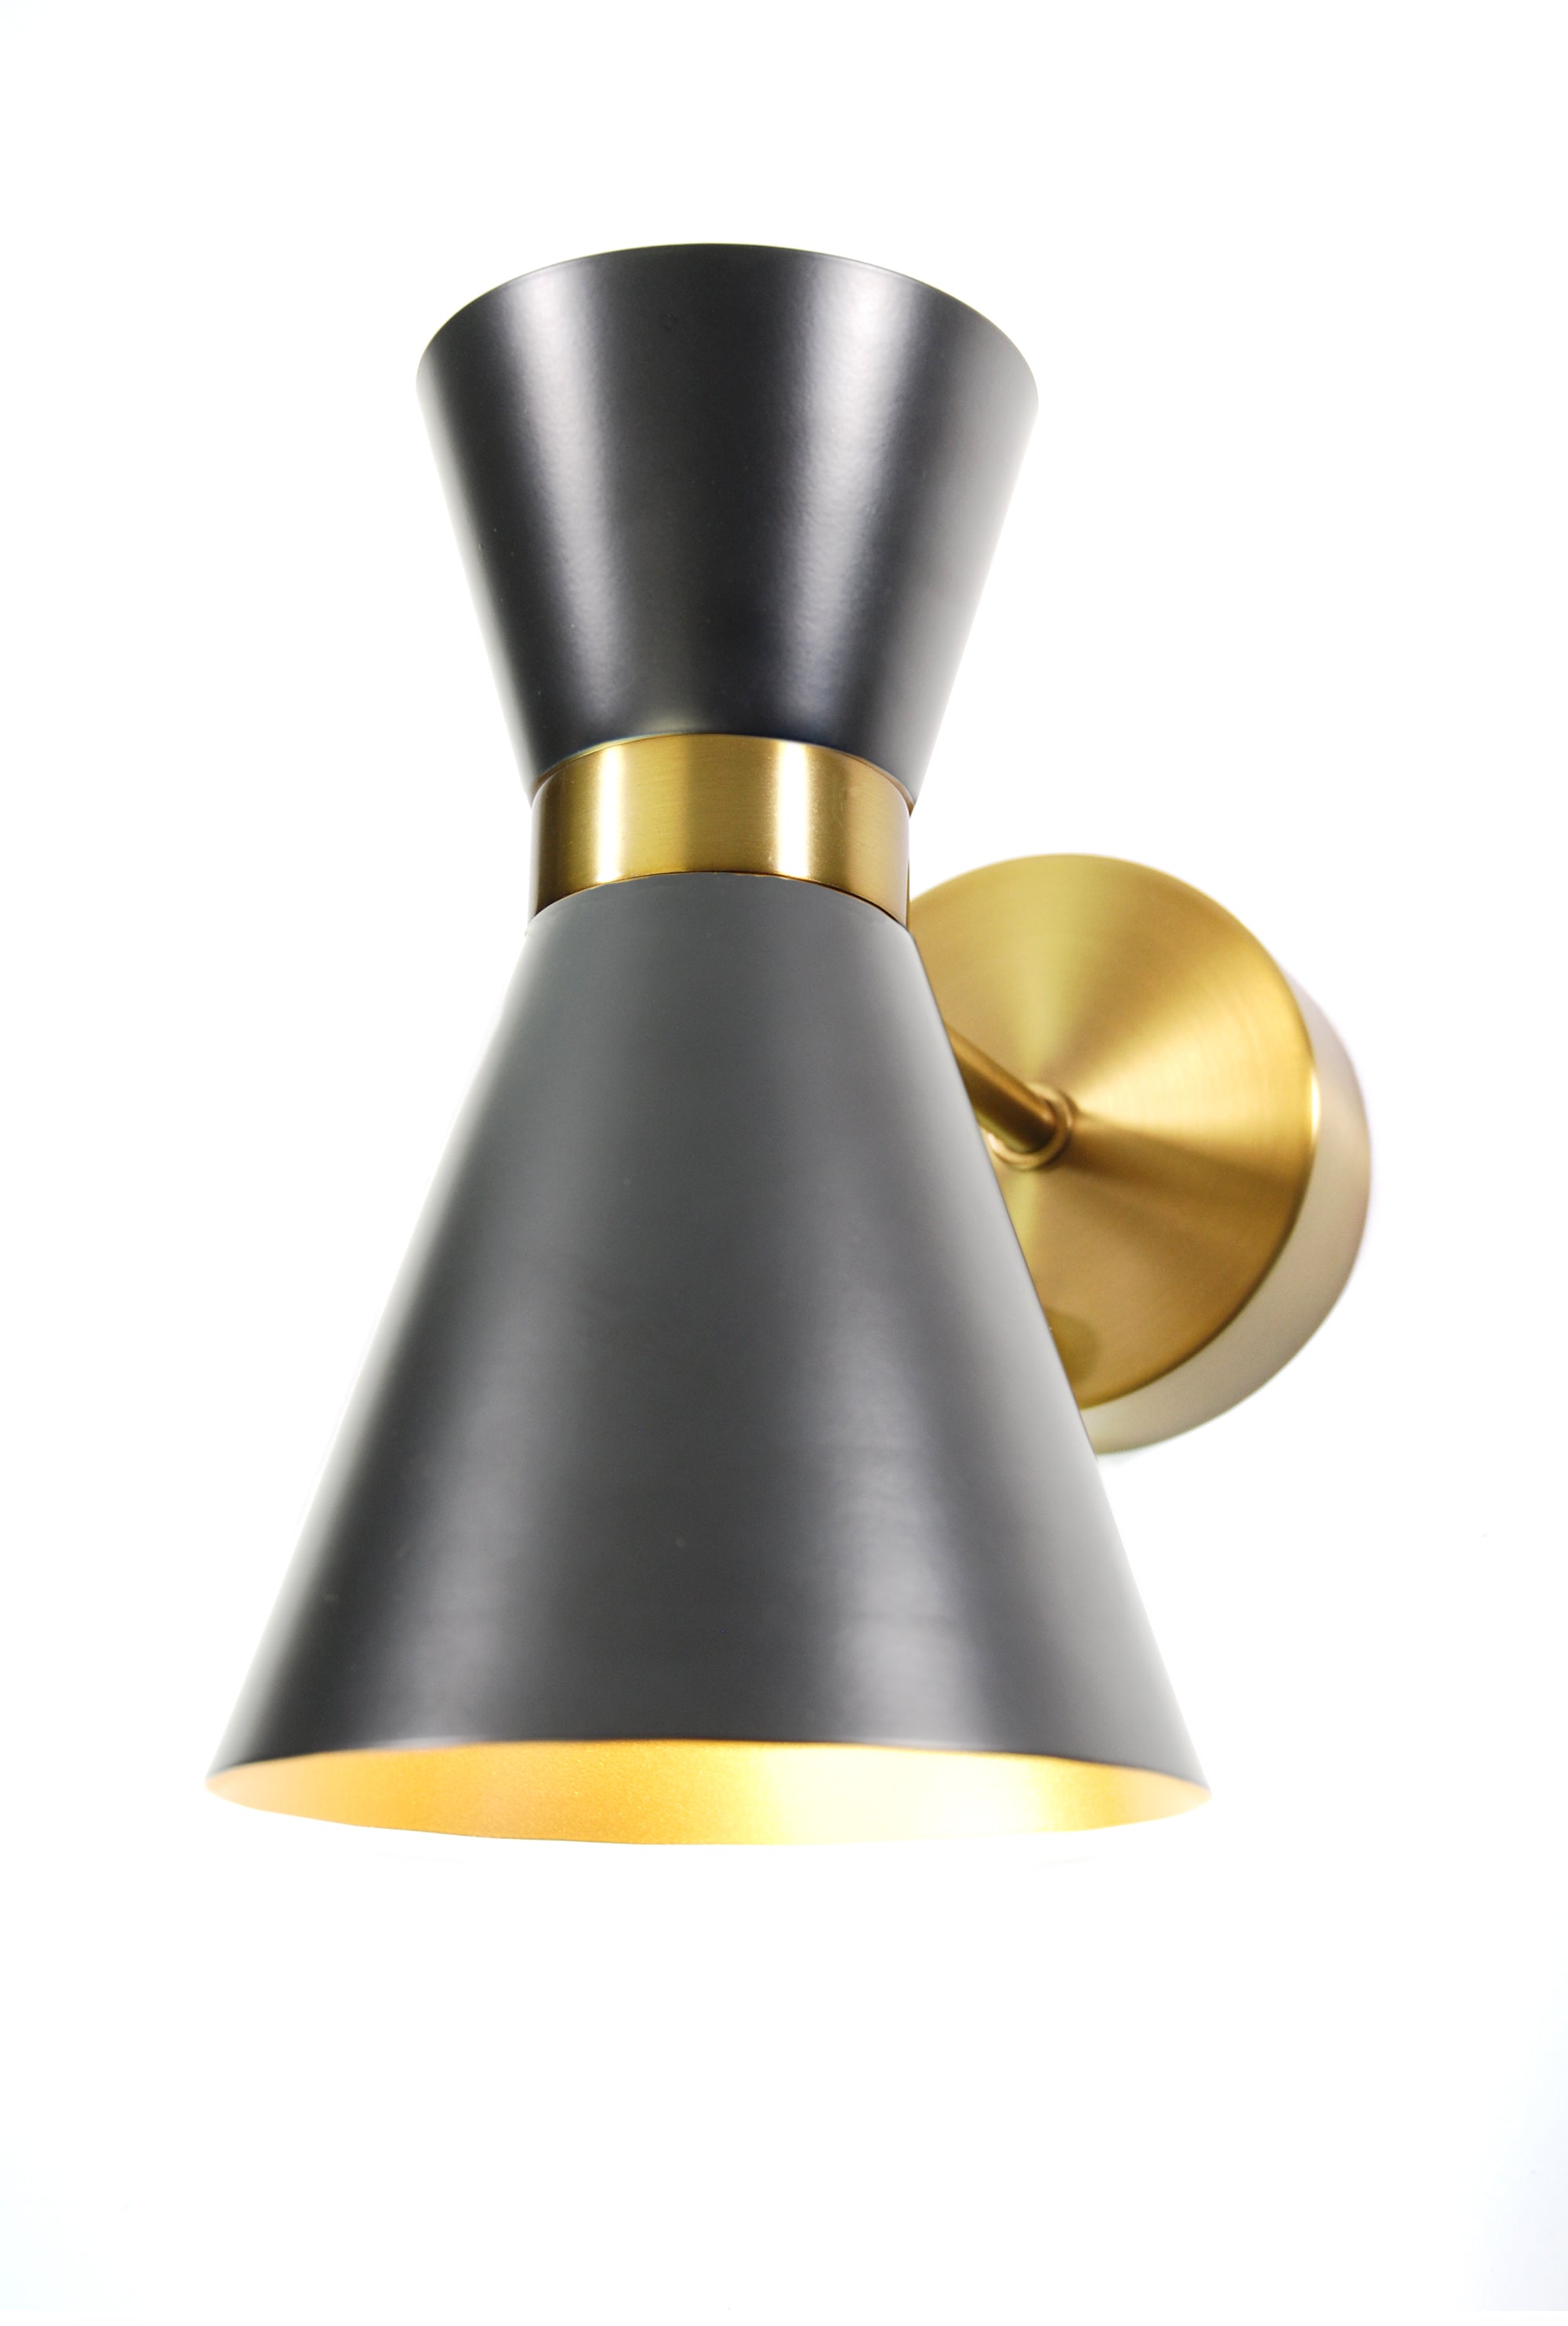 Emerson Cordless Wall Sconce - Antique Brass, Black Shade